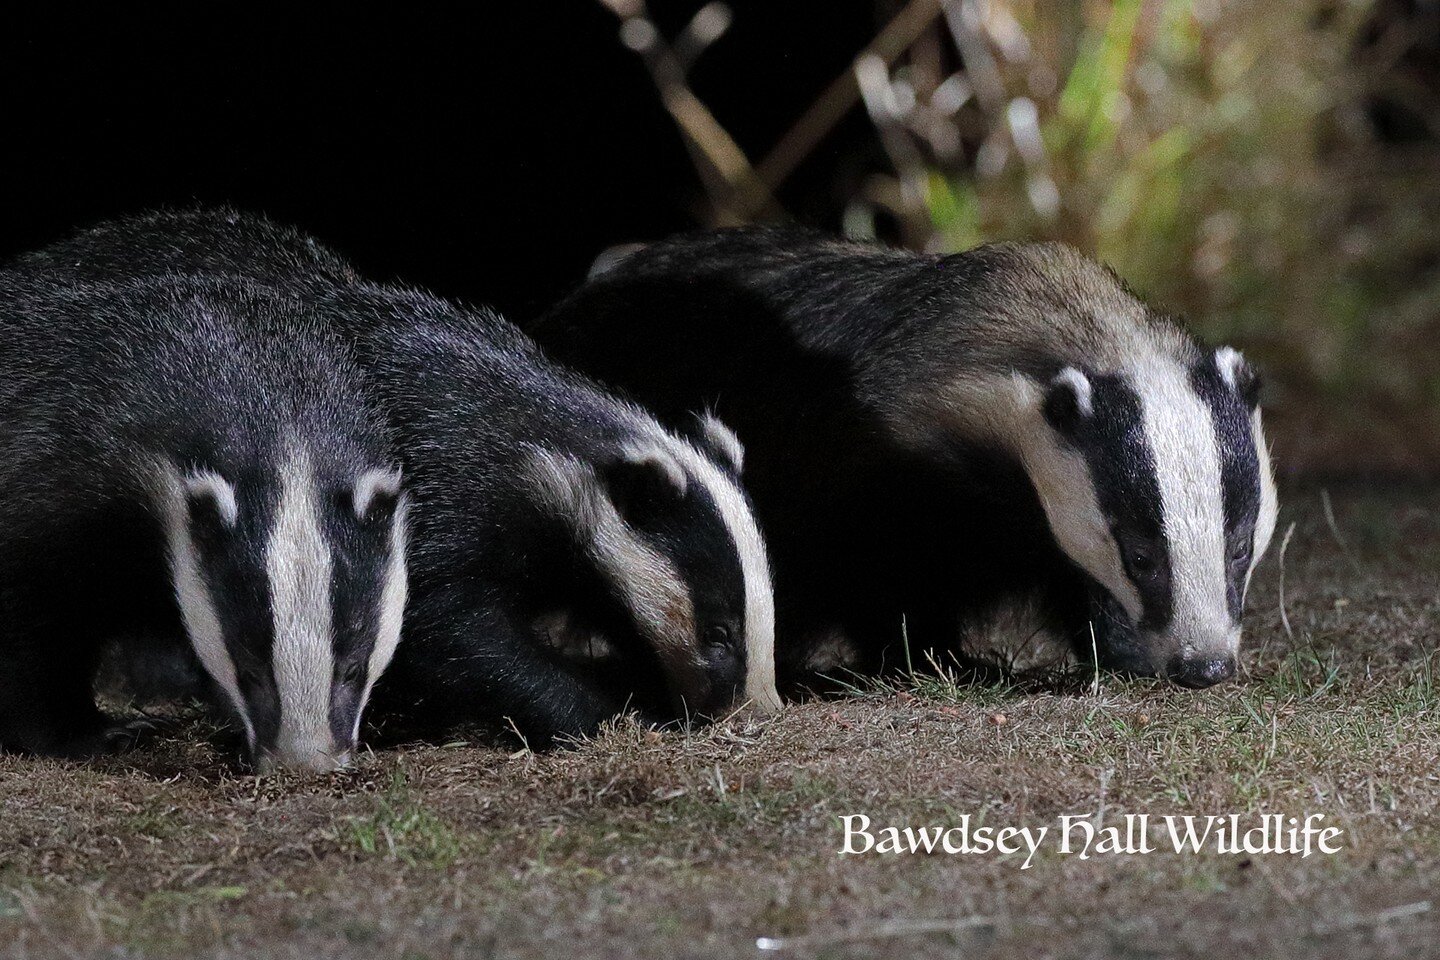 Not one, not two, but three badgers&hellip; currently we have the mother and her cubs visiting us very regularly. 

Spaces still available 
This week - x2 Tuesday 23rd August
Next week - x1 Friday 2nd September 

https://bookwhen.com/bawdseyhallwildl